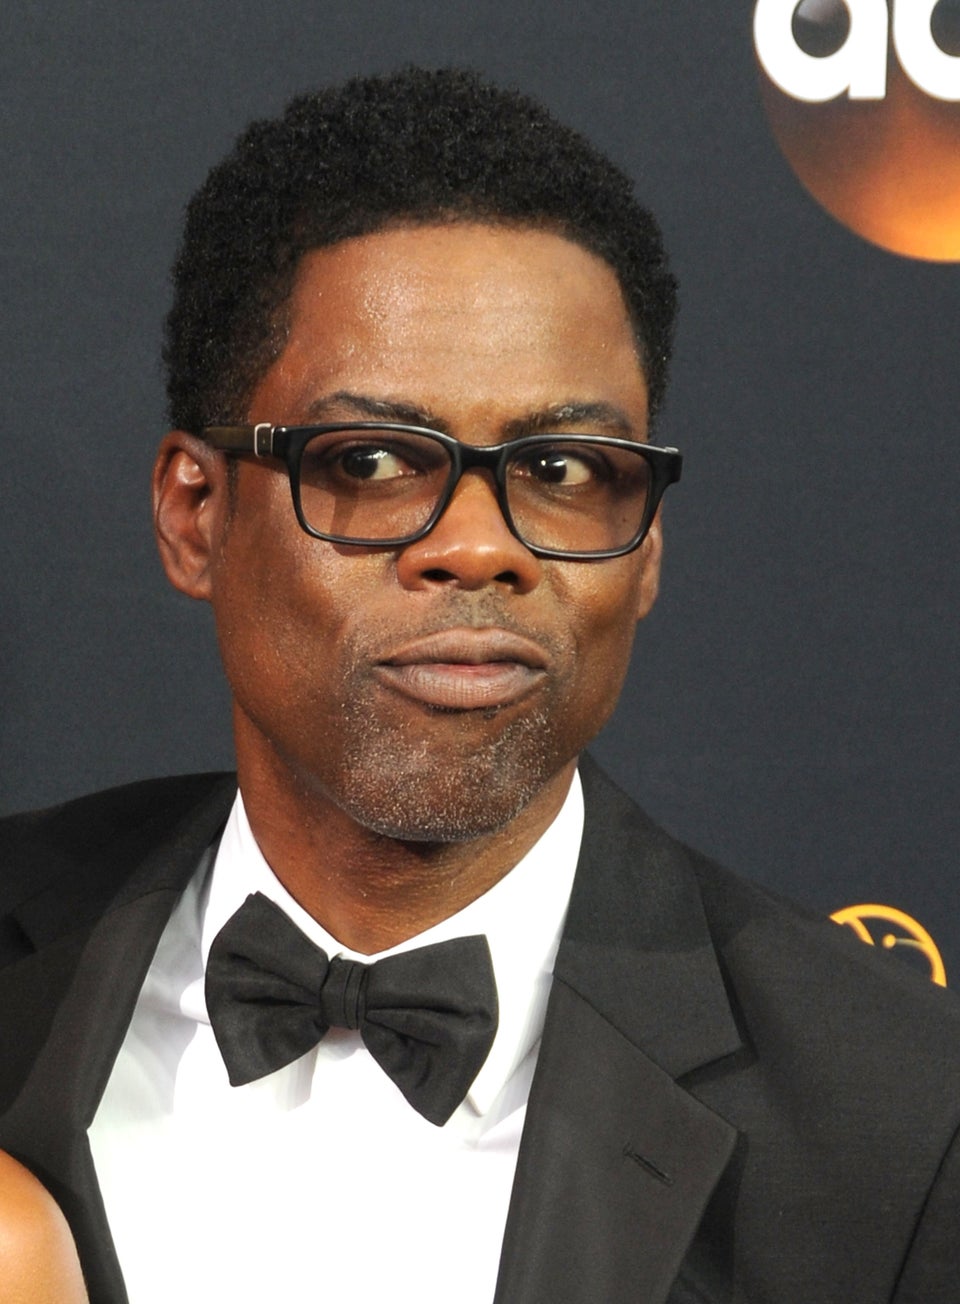 Chris Rock Sets Record – And Earns Big Bucks – With New Netflix Stand-Up Deal